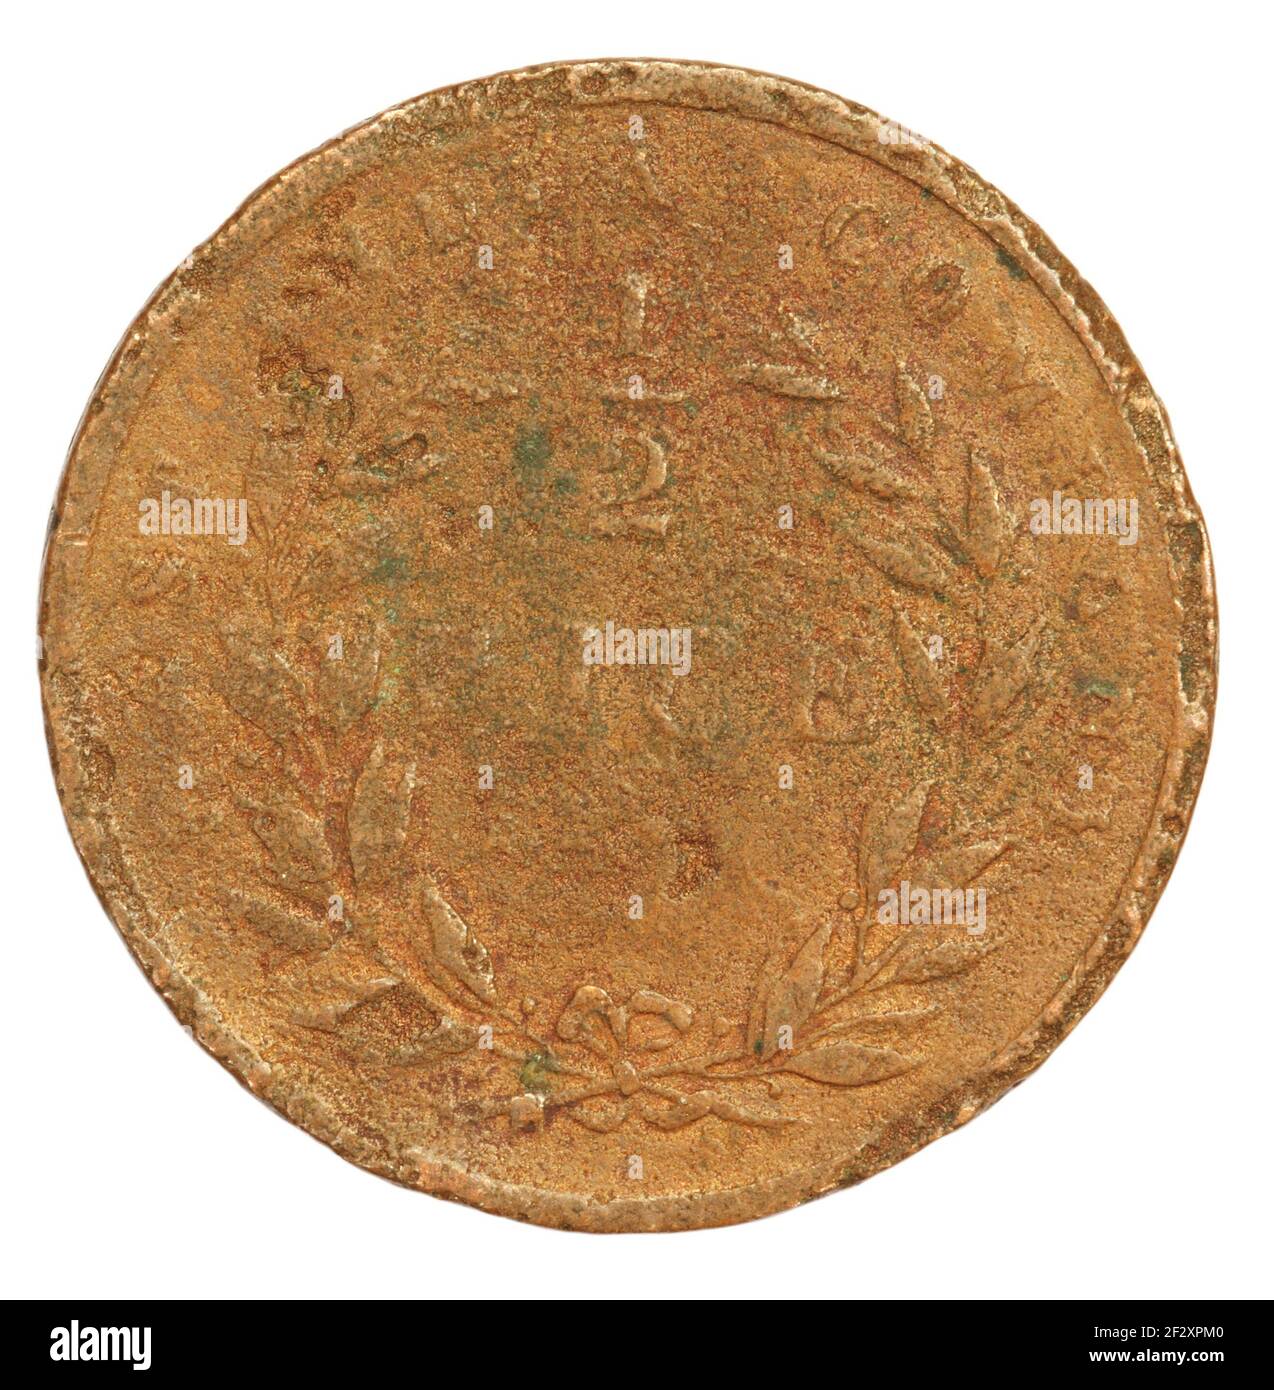 Old Indian Coin of British East India Company closeup Stock Photo